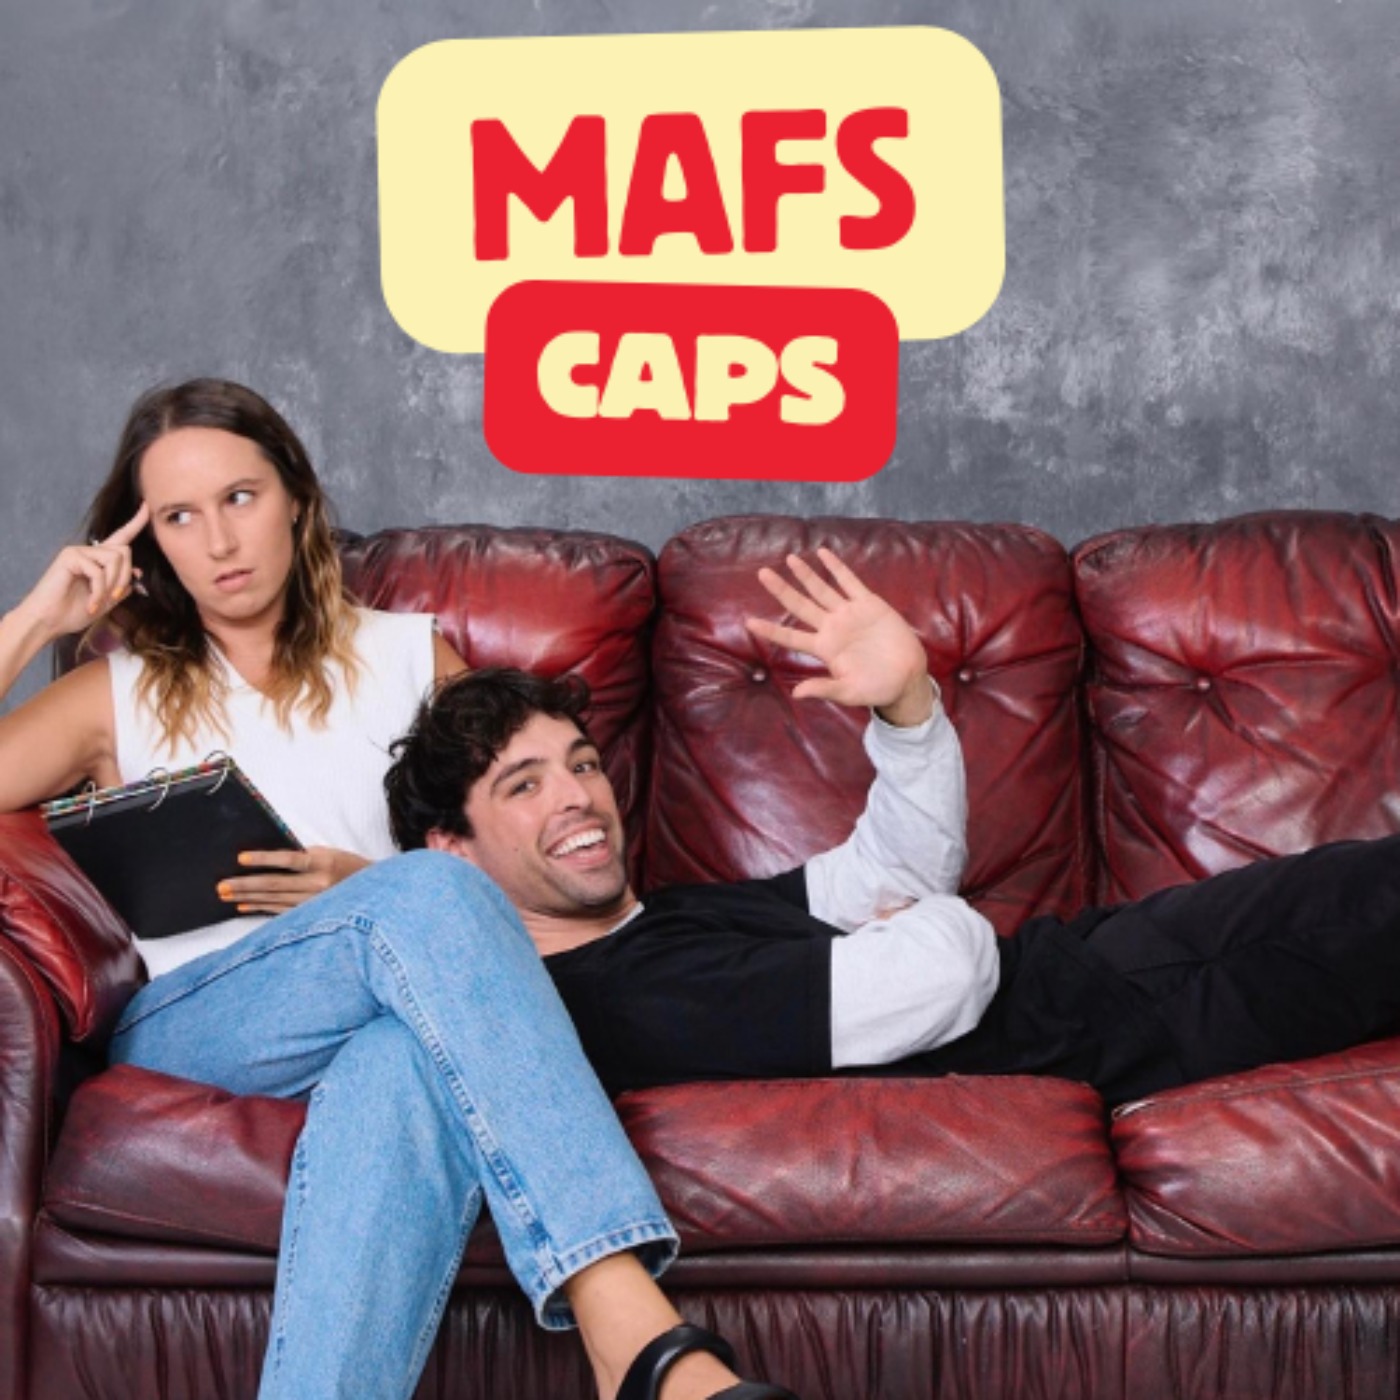 MAFSCAPS Week 9: Final Vows Predictions